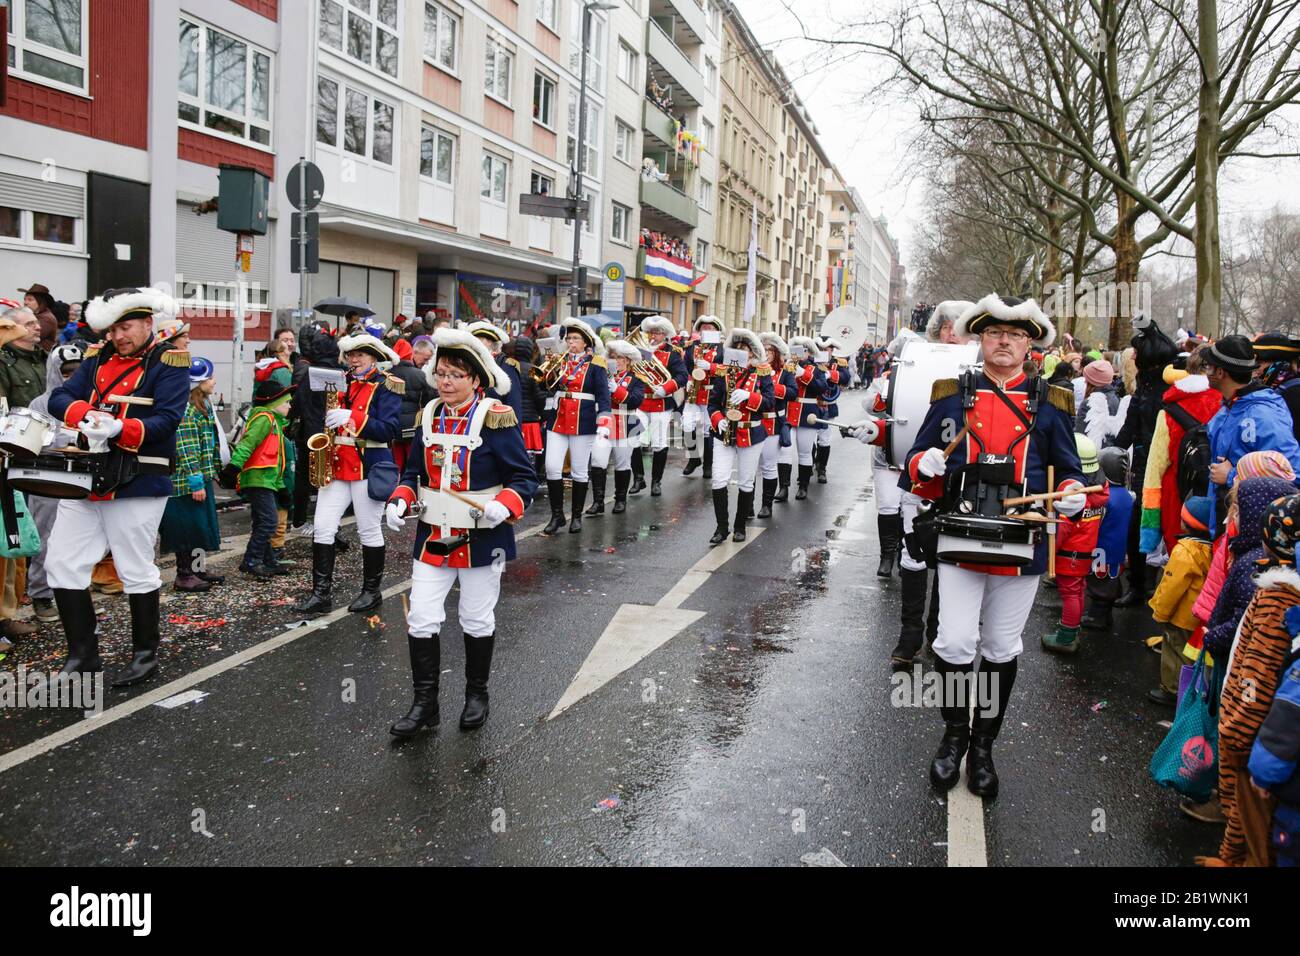 Mainz, Germany. 24th February 2020. Members of the marching band of the carnival guards Bodenheimer Schoppengarde march in the the Mainz Rose Monday parade. Around half a million people lined the streets of Mainz for the traditional Rose Monday Carnival Parade. The 9 km long parade with over 9,000 participants is one of the three large Rose Monday Parades in Germany. Stock Photo